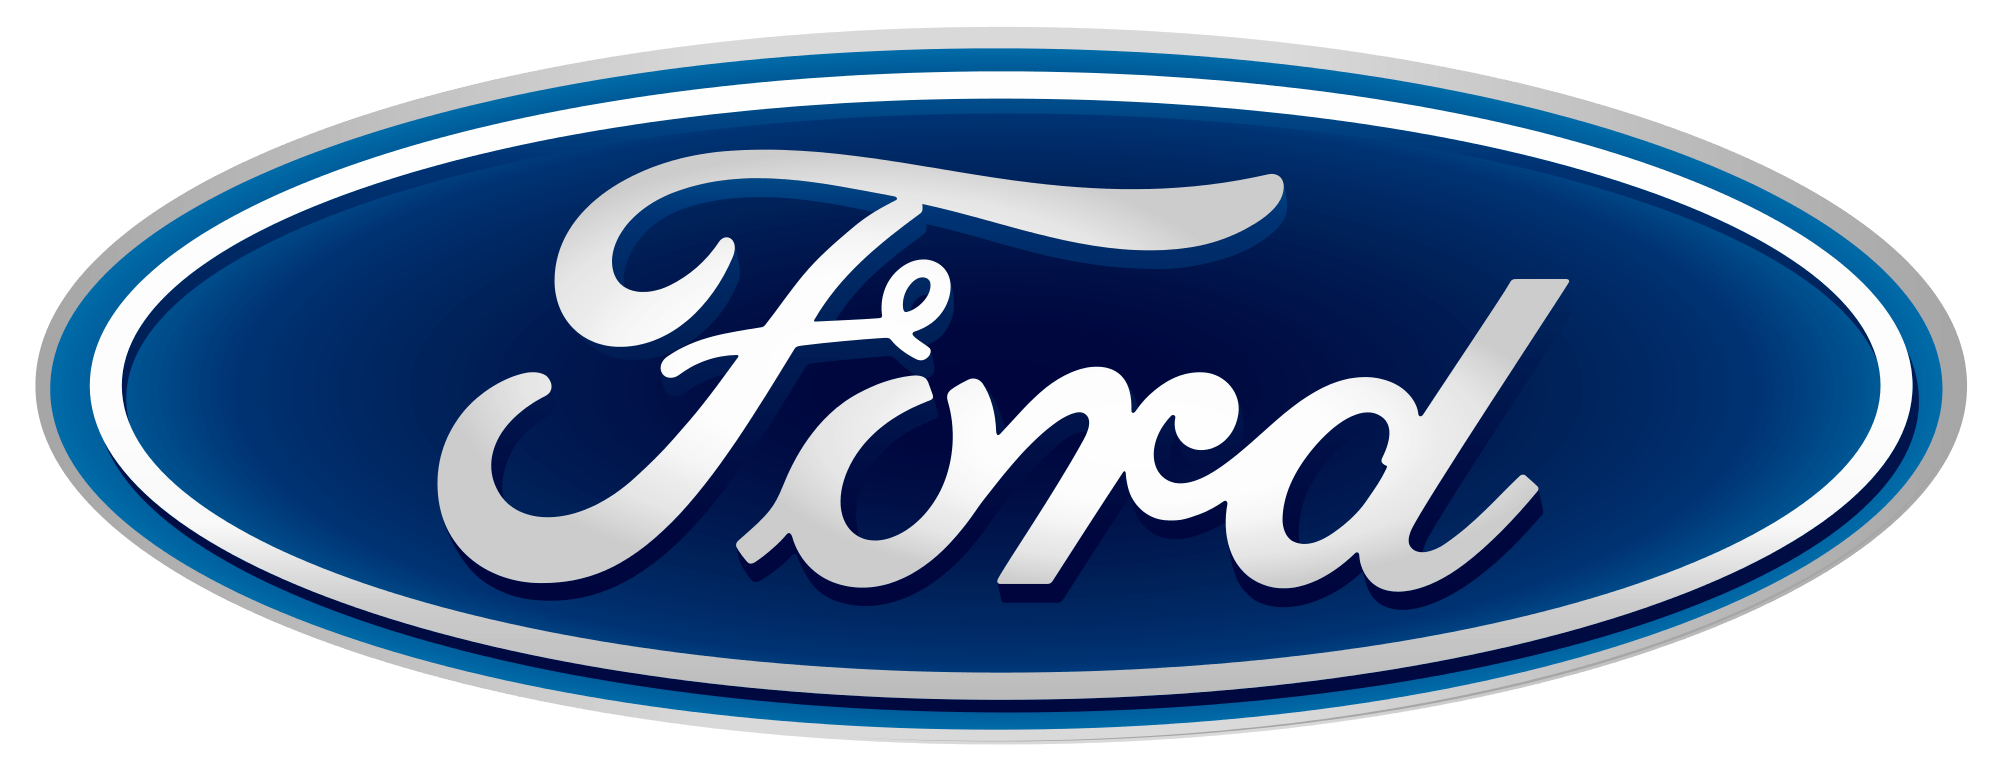 First Ford Logo - Recalls Cost Ford During First Quarter 2017 | WKAR